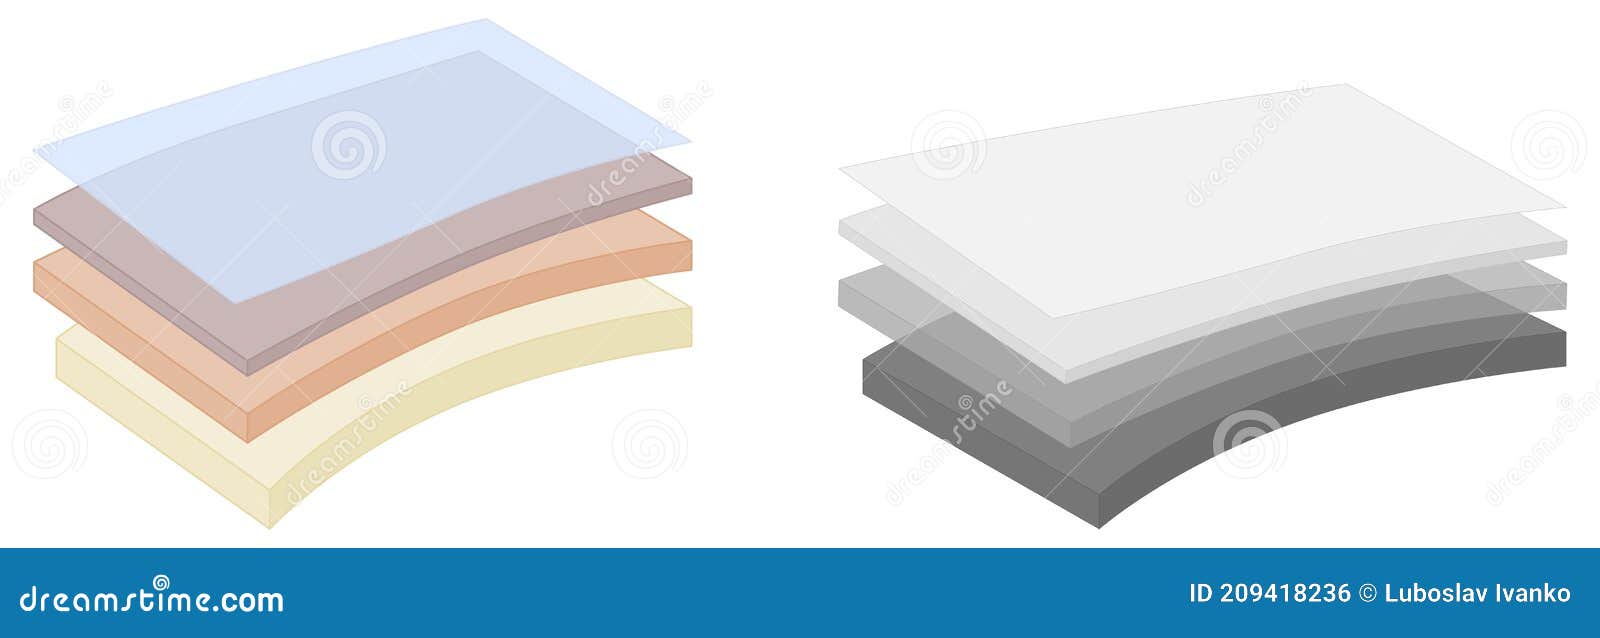 Opaque Material Stock Illustrations 113 Opaque Material Stock Illustrations Vectors Clipart Dreamstime